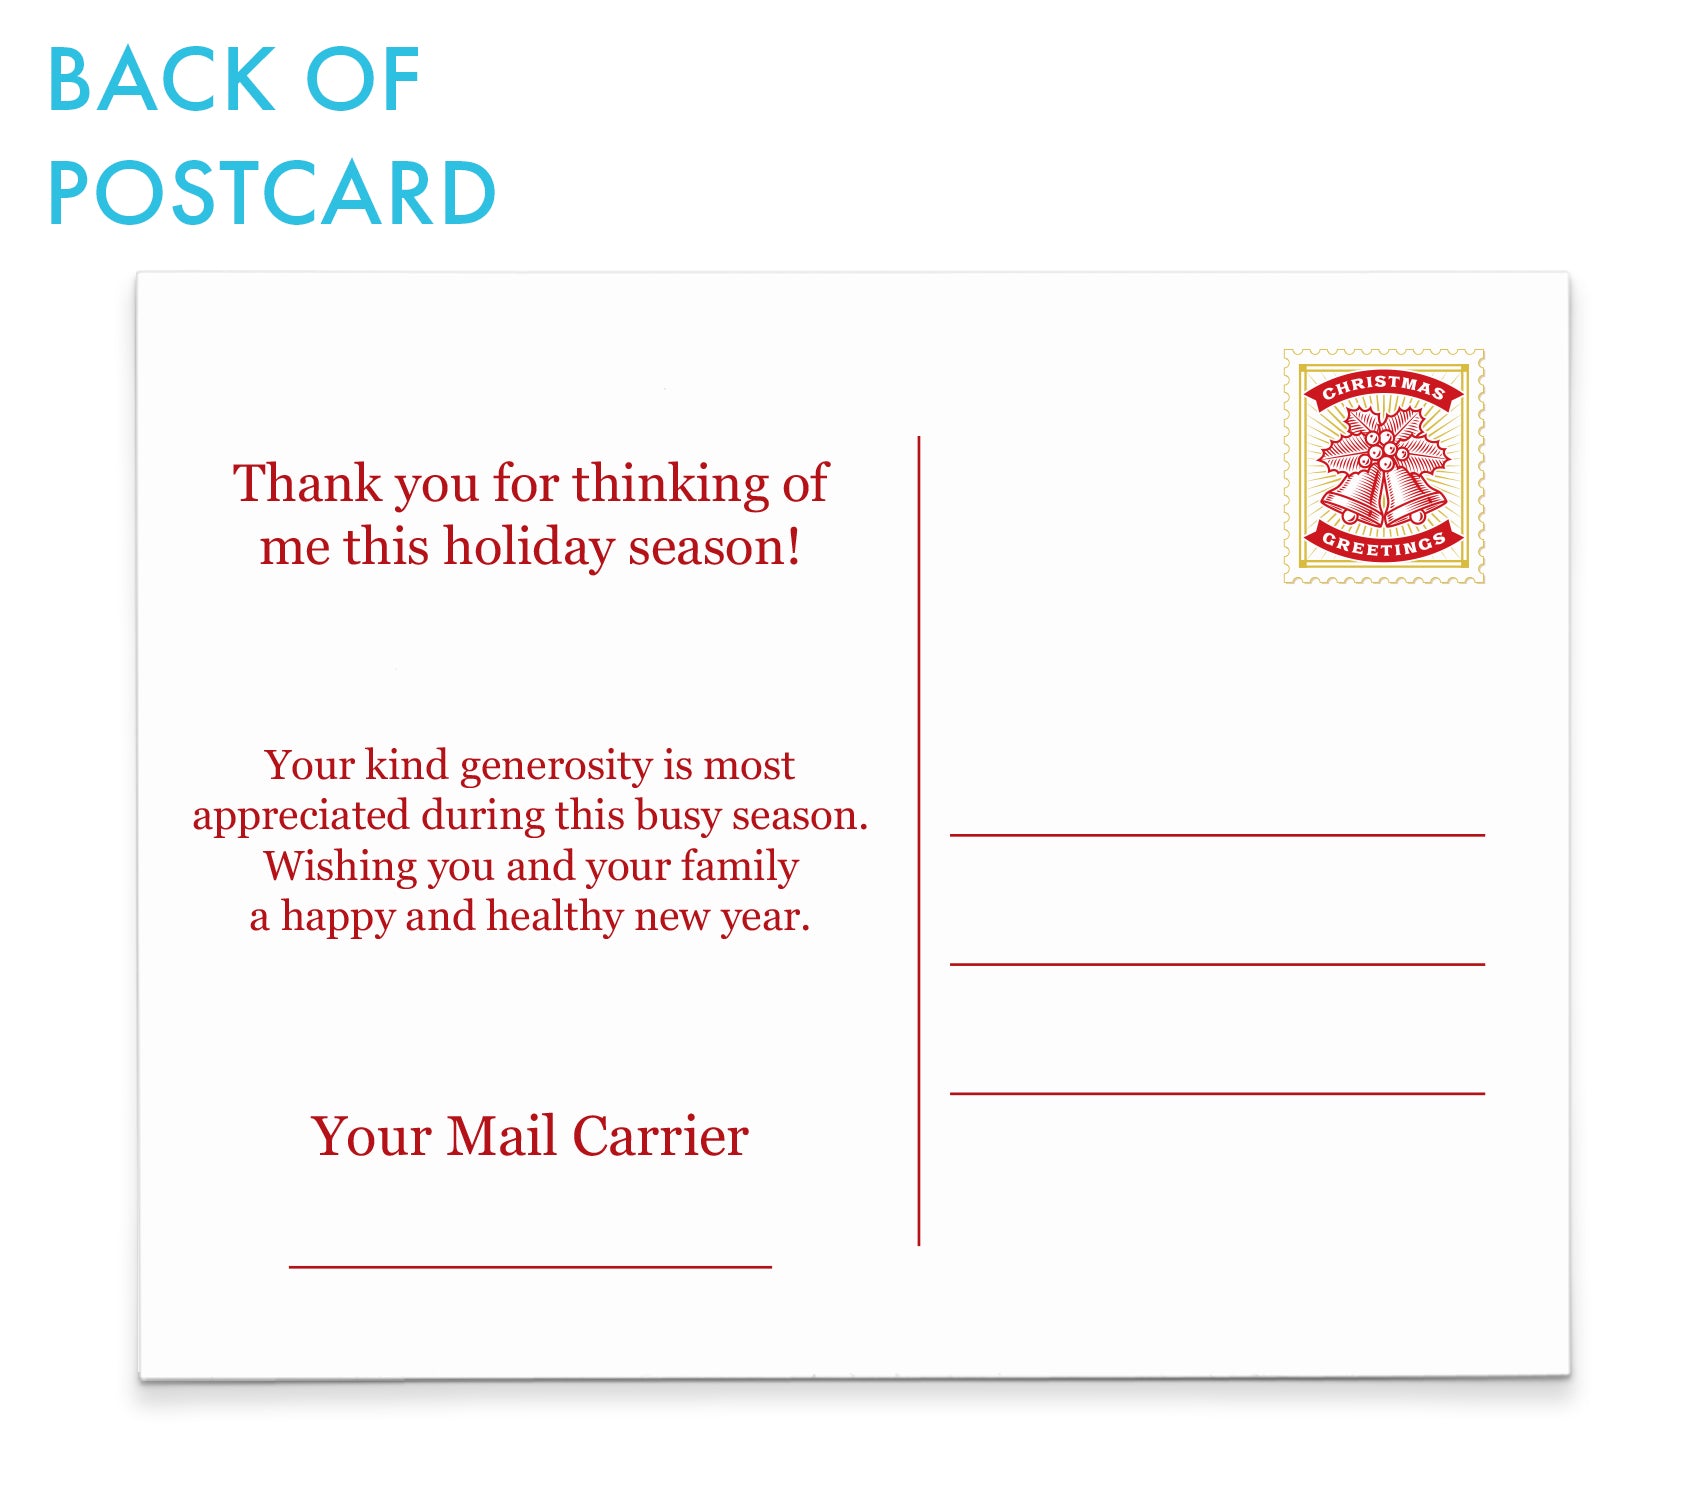 HGC010 Mail Carrier Christmas PostCards with Santa Bag gifts presents thank you usps holiday